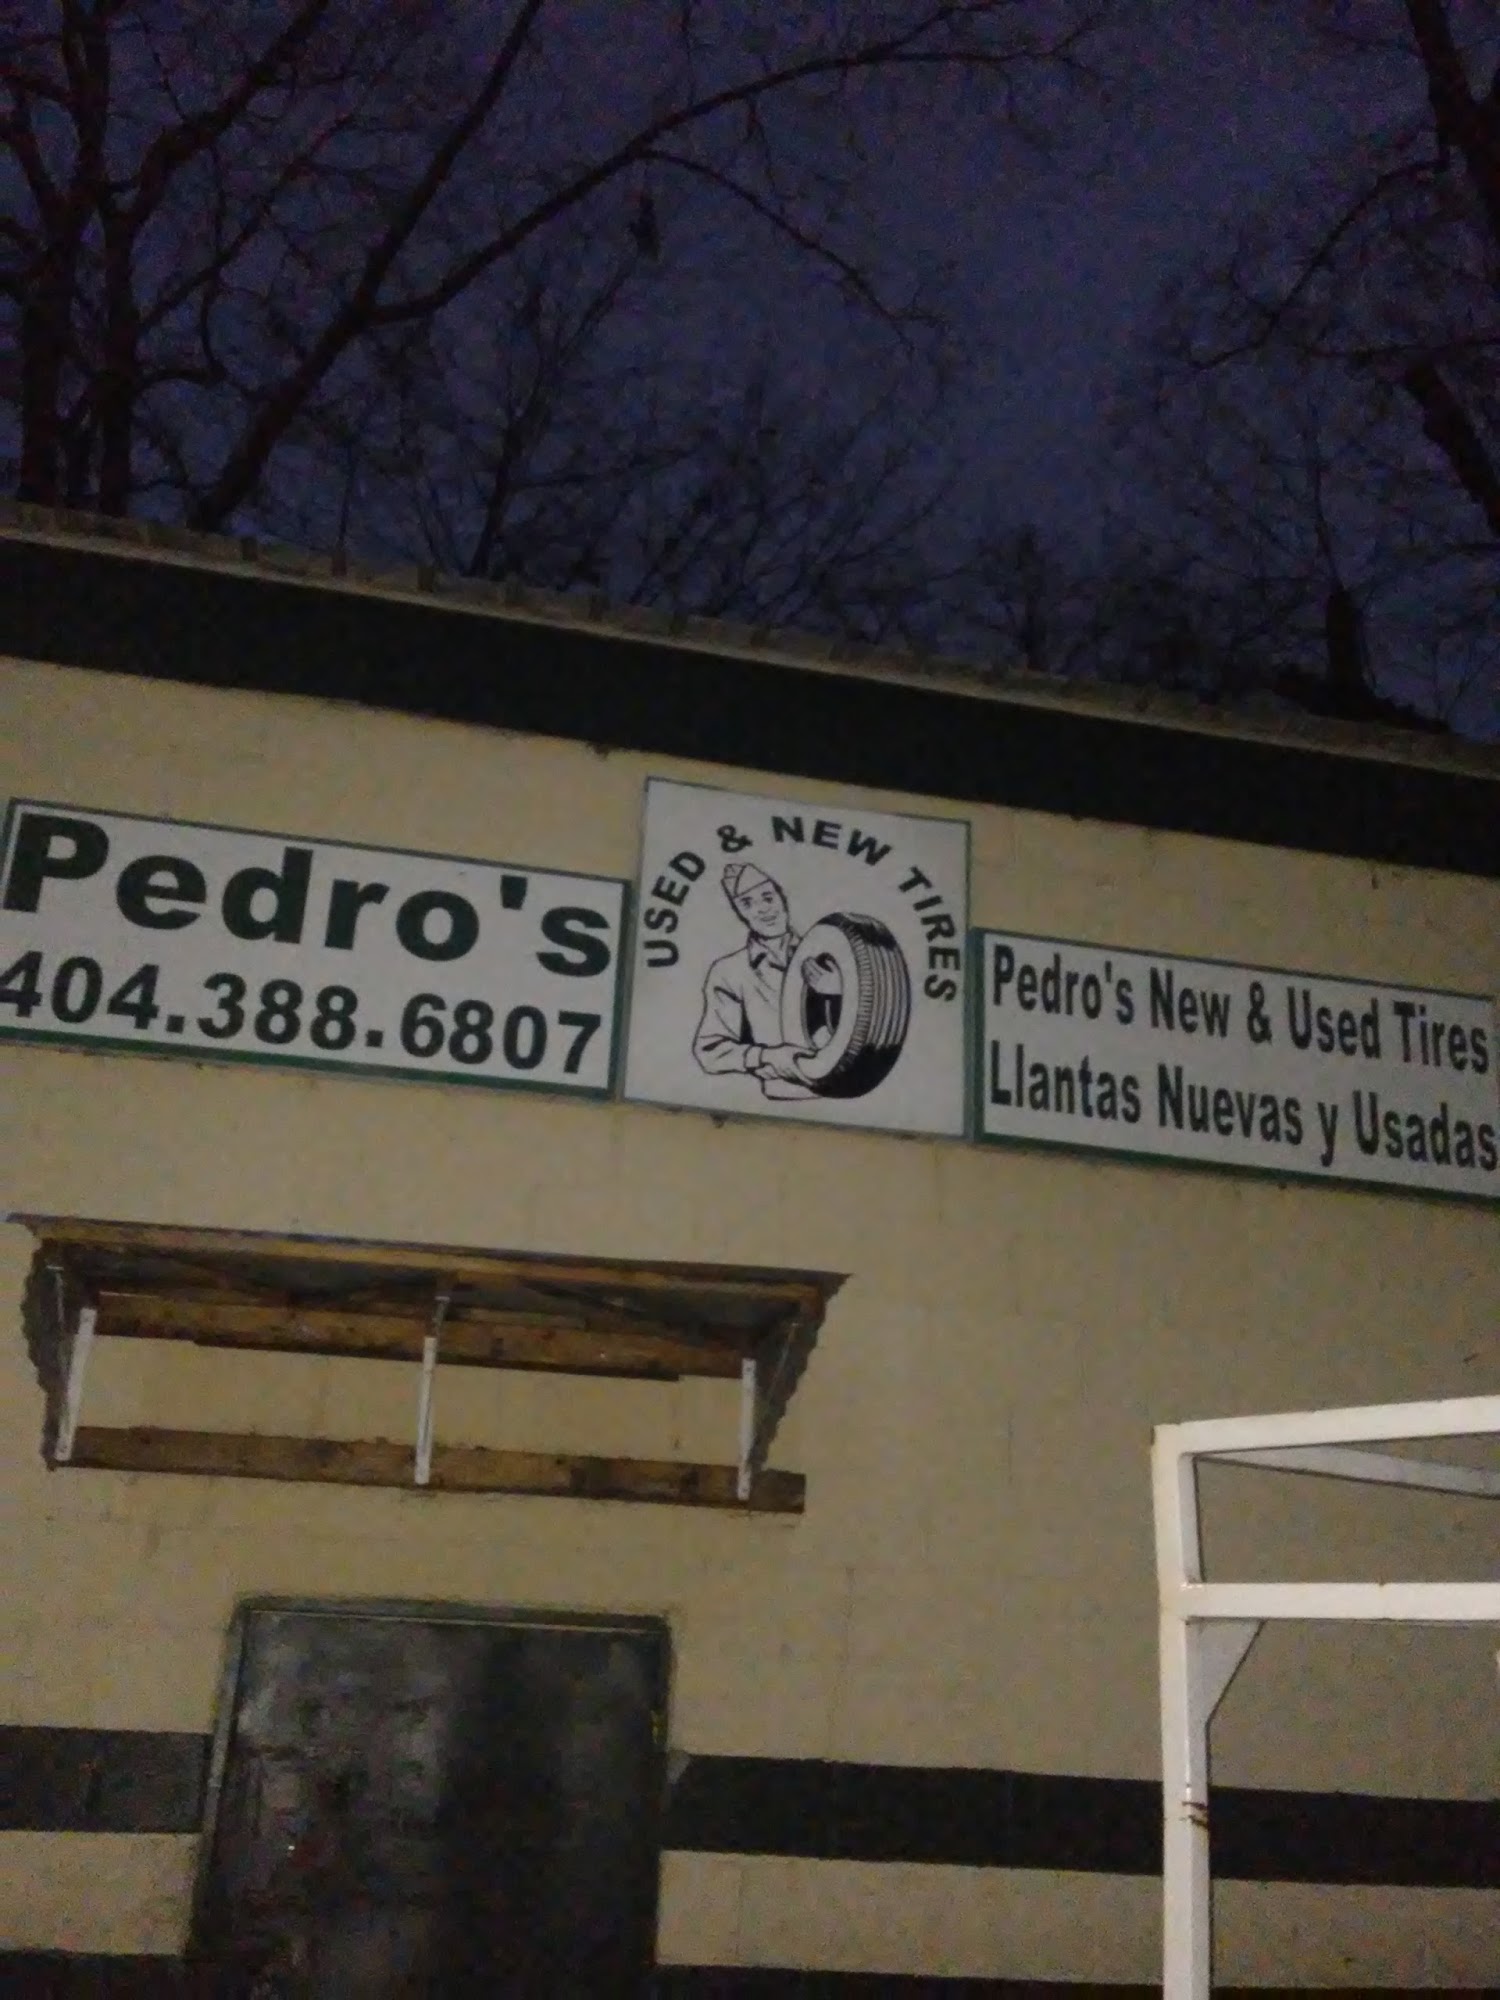 Pedro's New & Used Tires